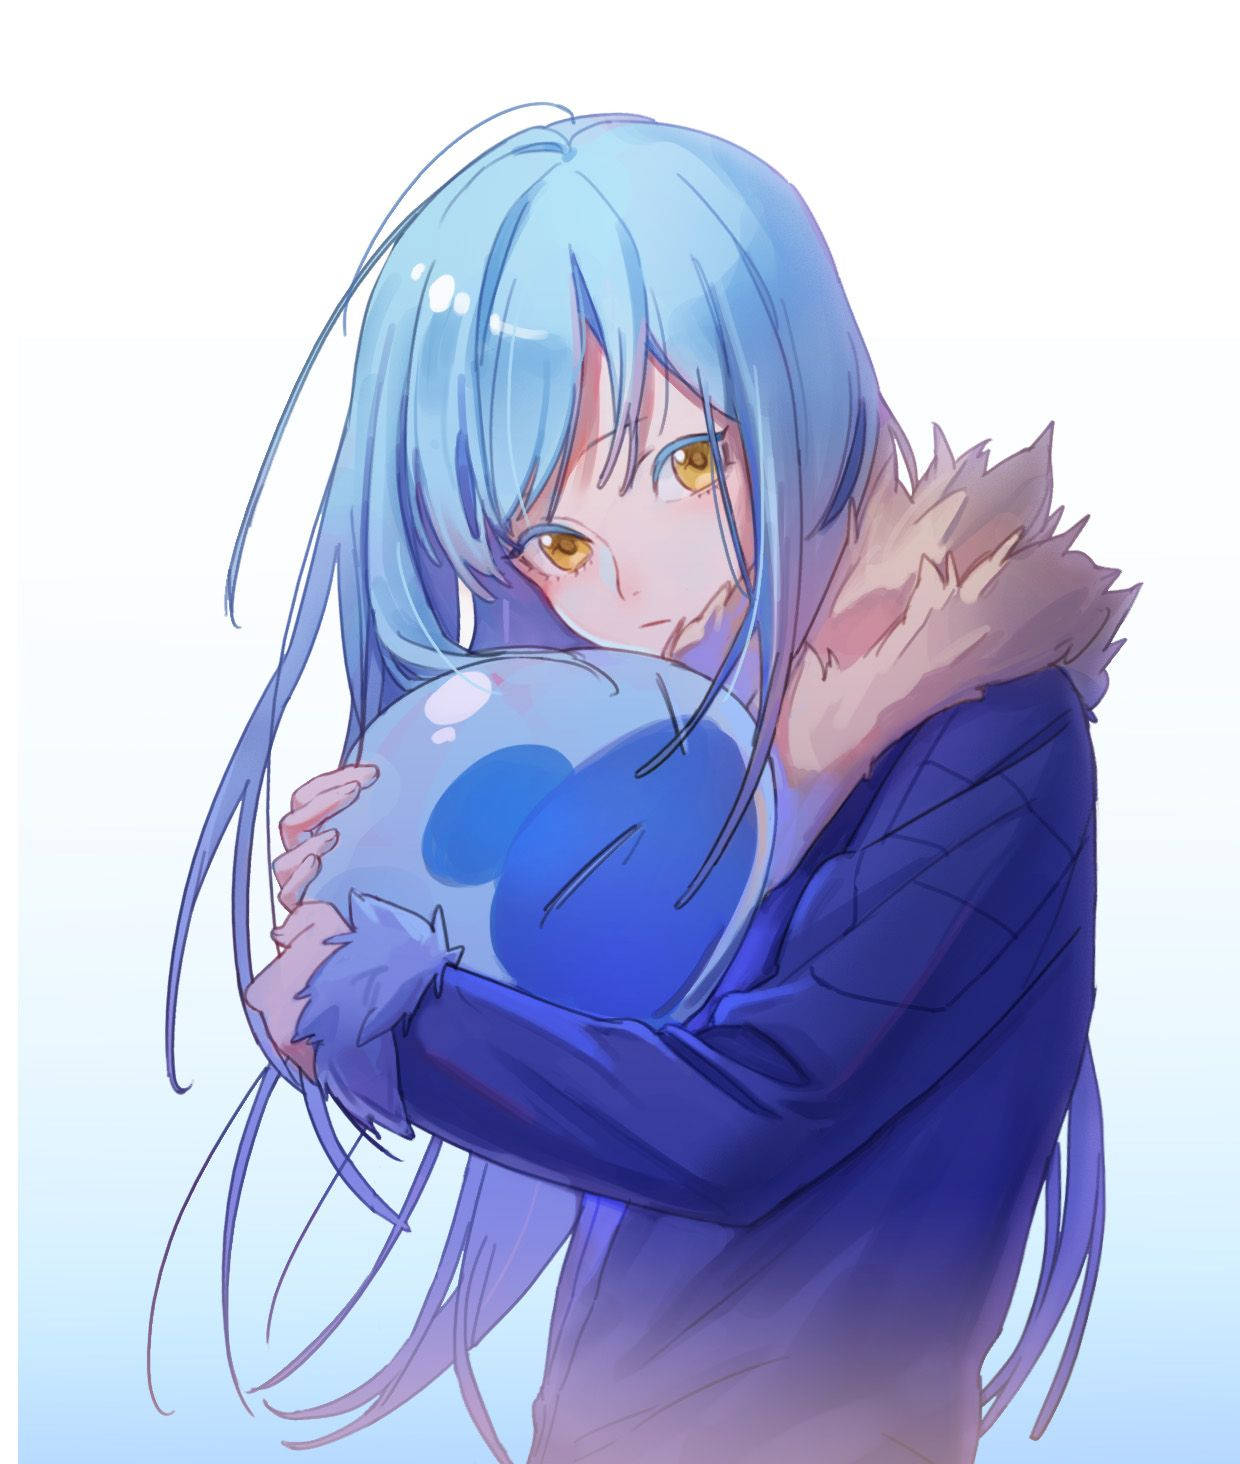 That Time I Got Reincarnated As A Slime - Follow Rimuru and friends on an adventure! Wallpaper